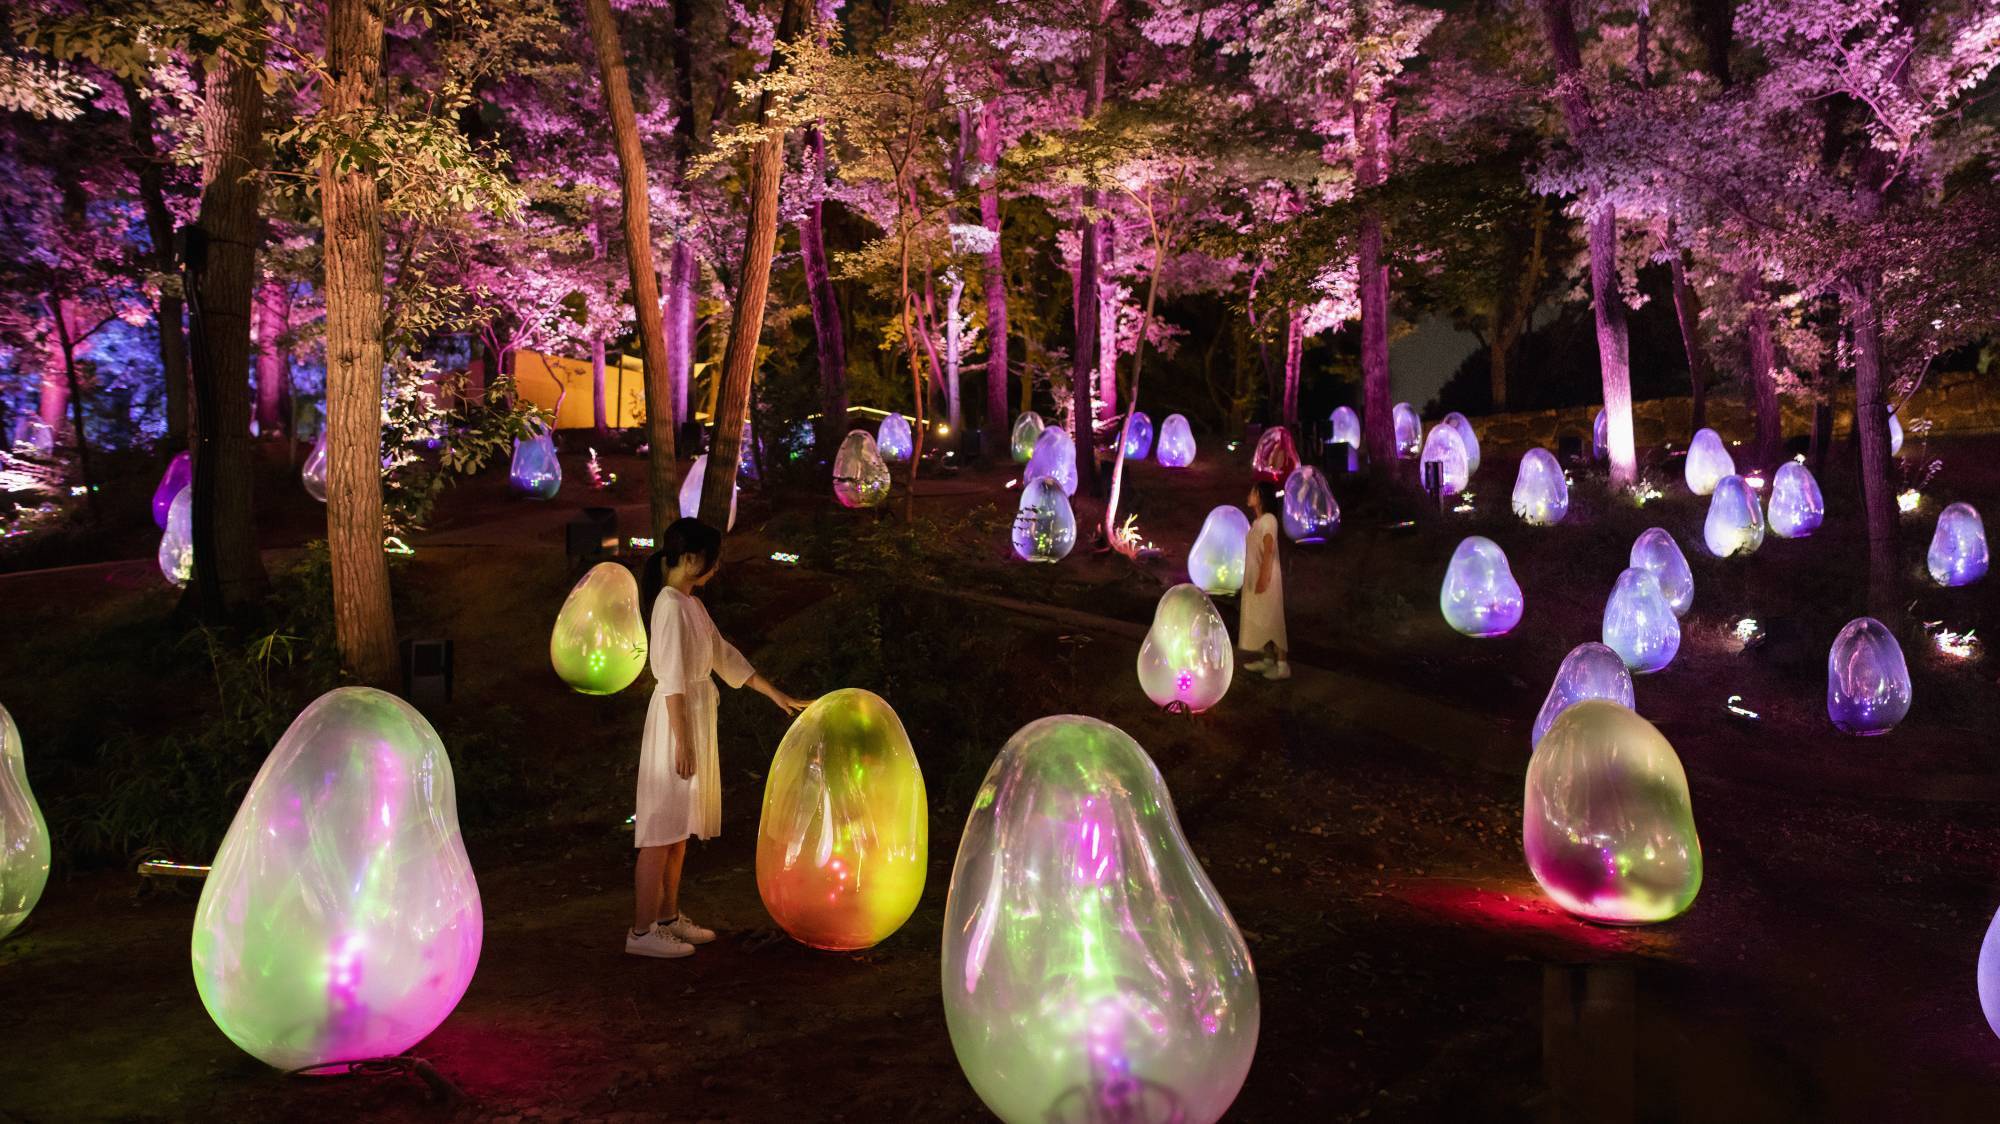 TeamLab: Resonating Life in the Acorn Forest